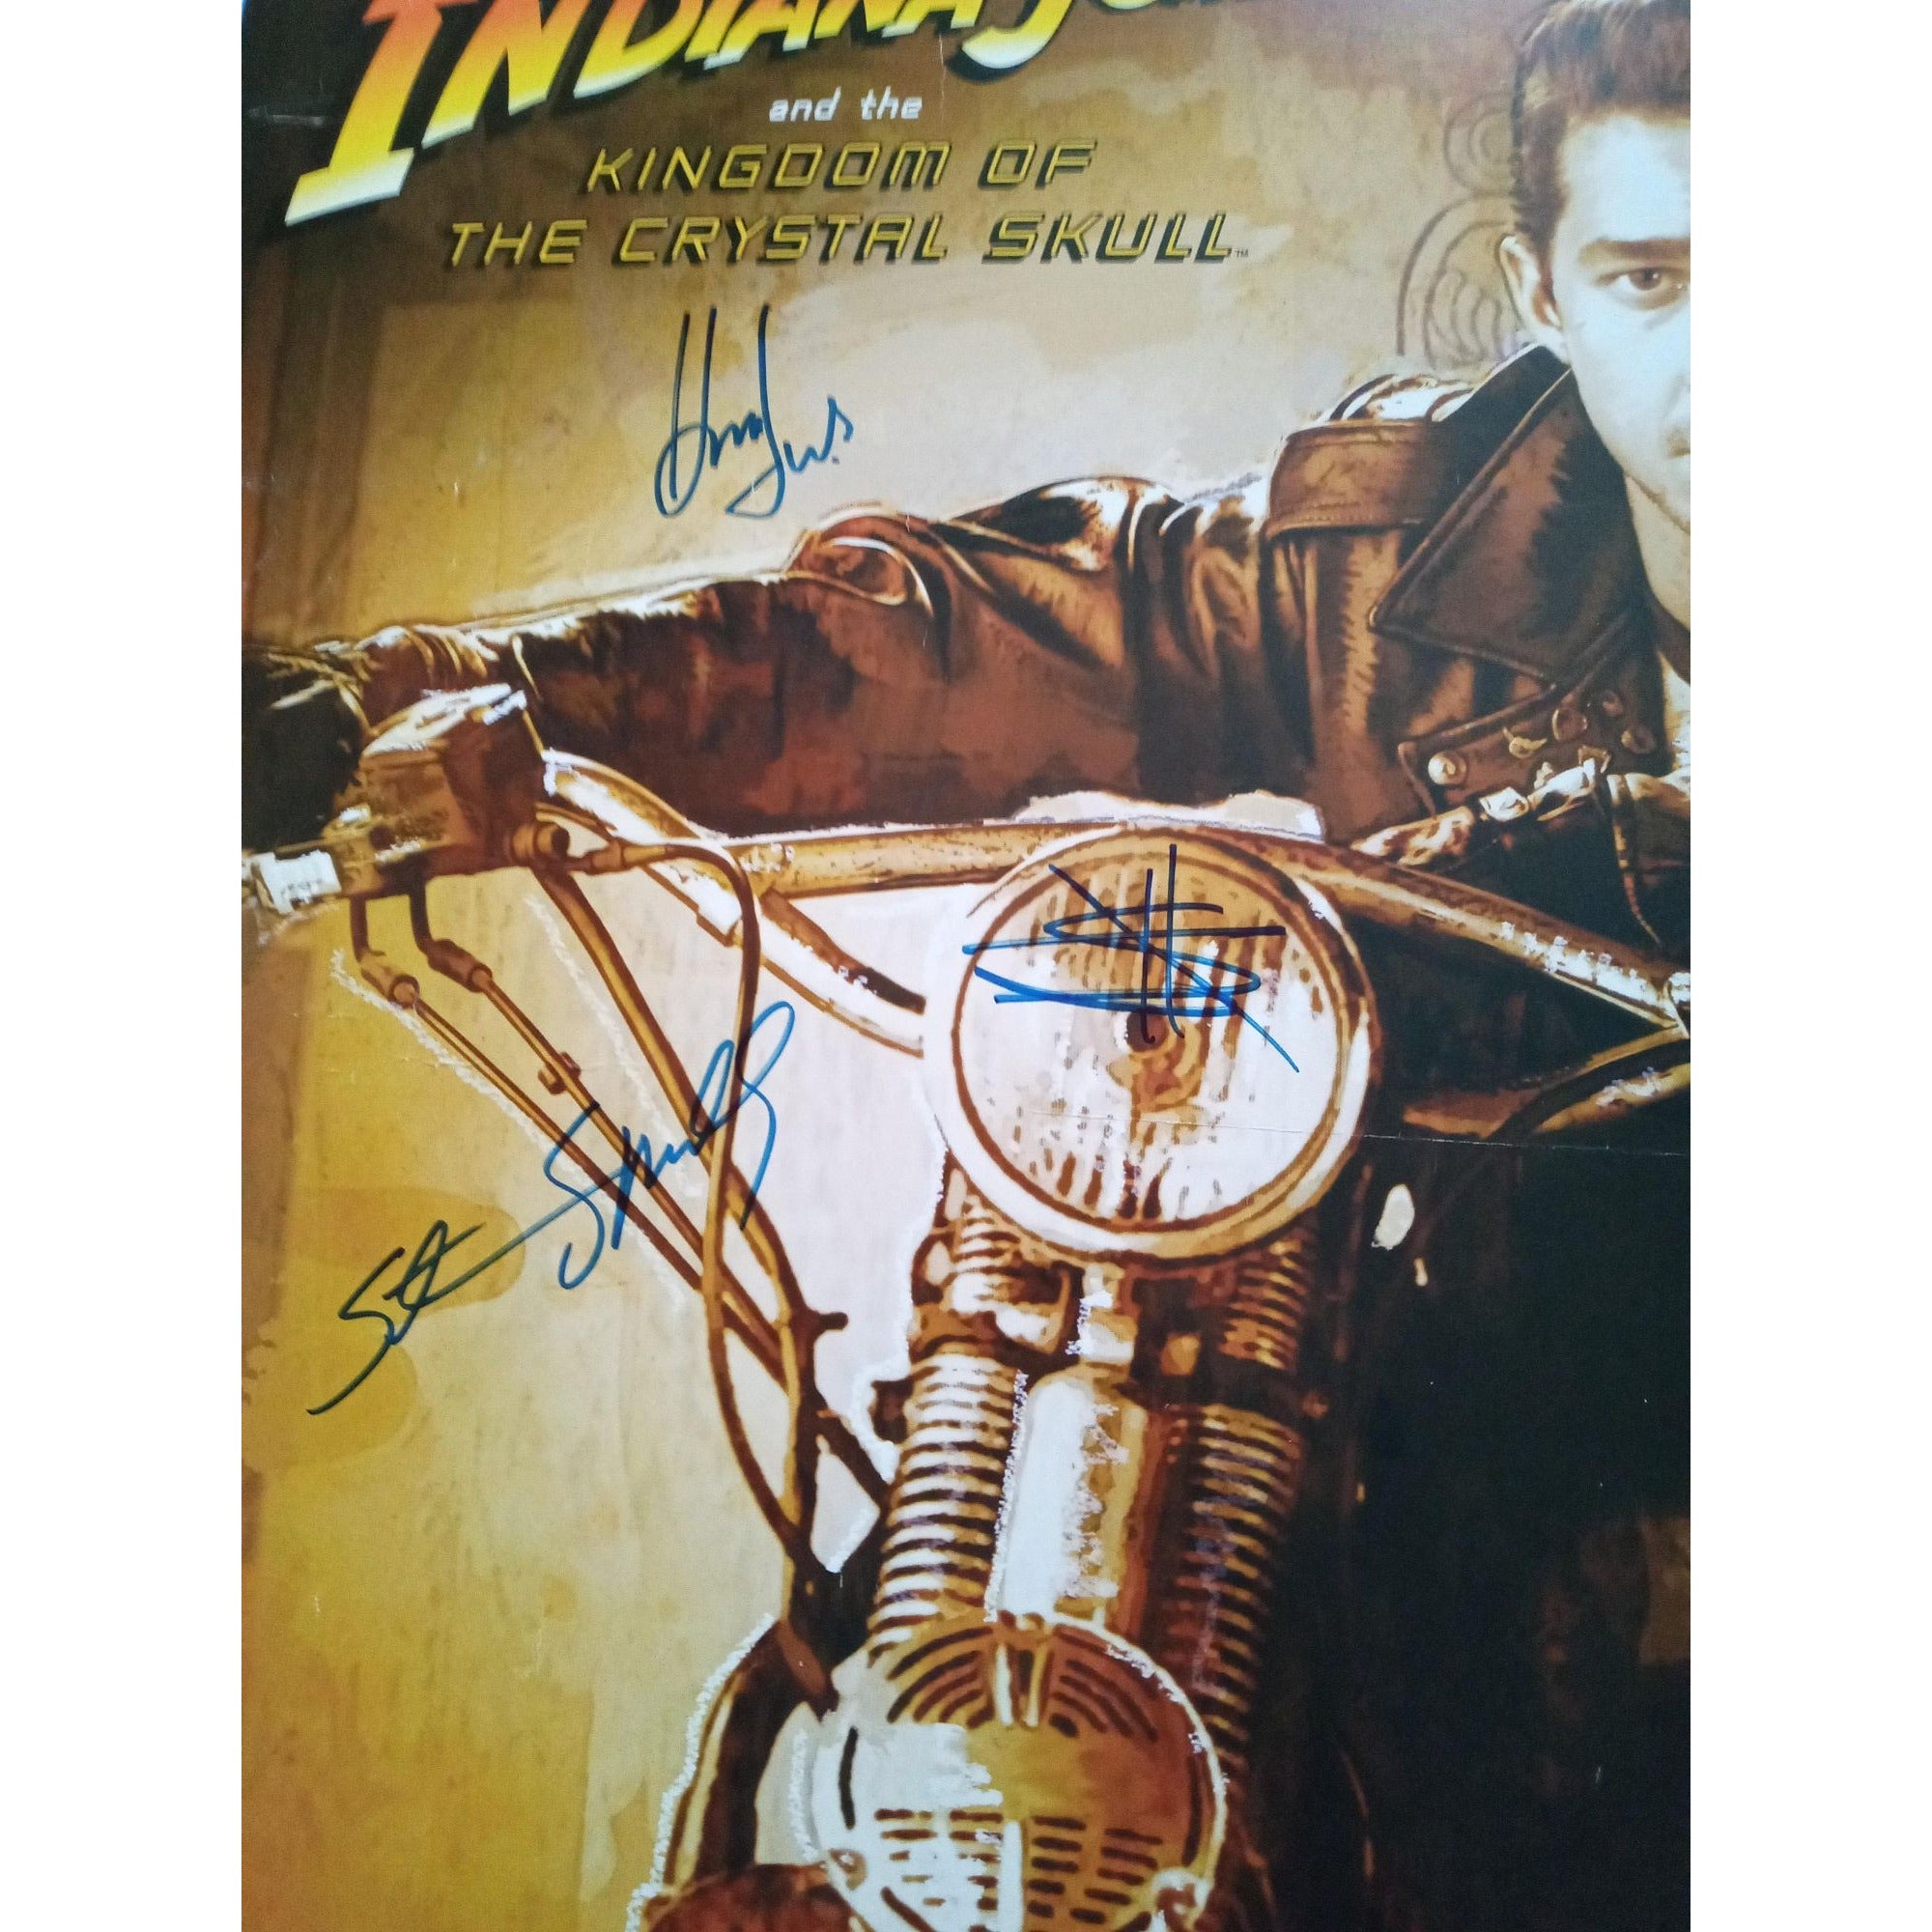 Harrison Ford Steven Spielberg George Lucas Shia LaBeouf signed posterw proof